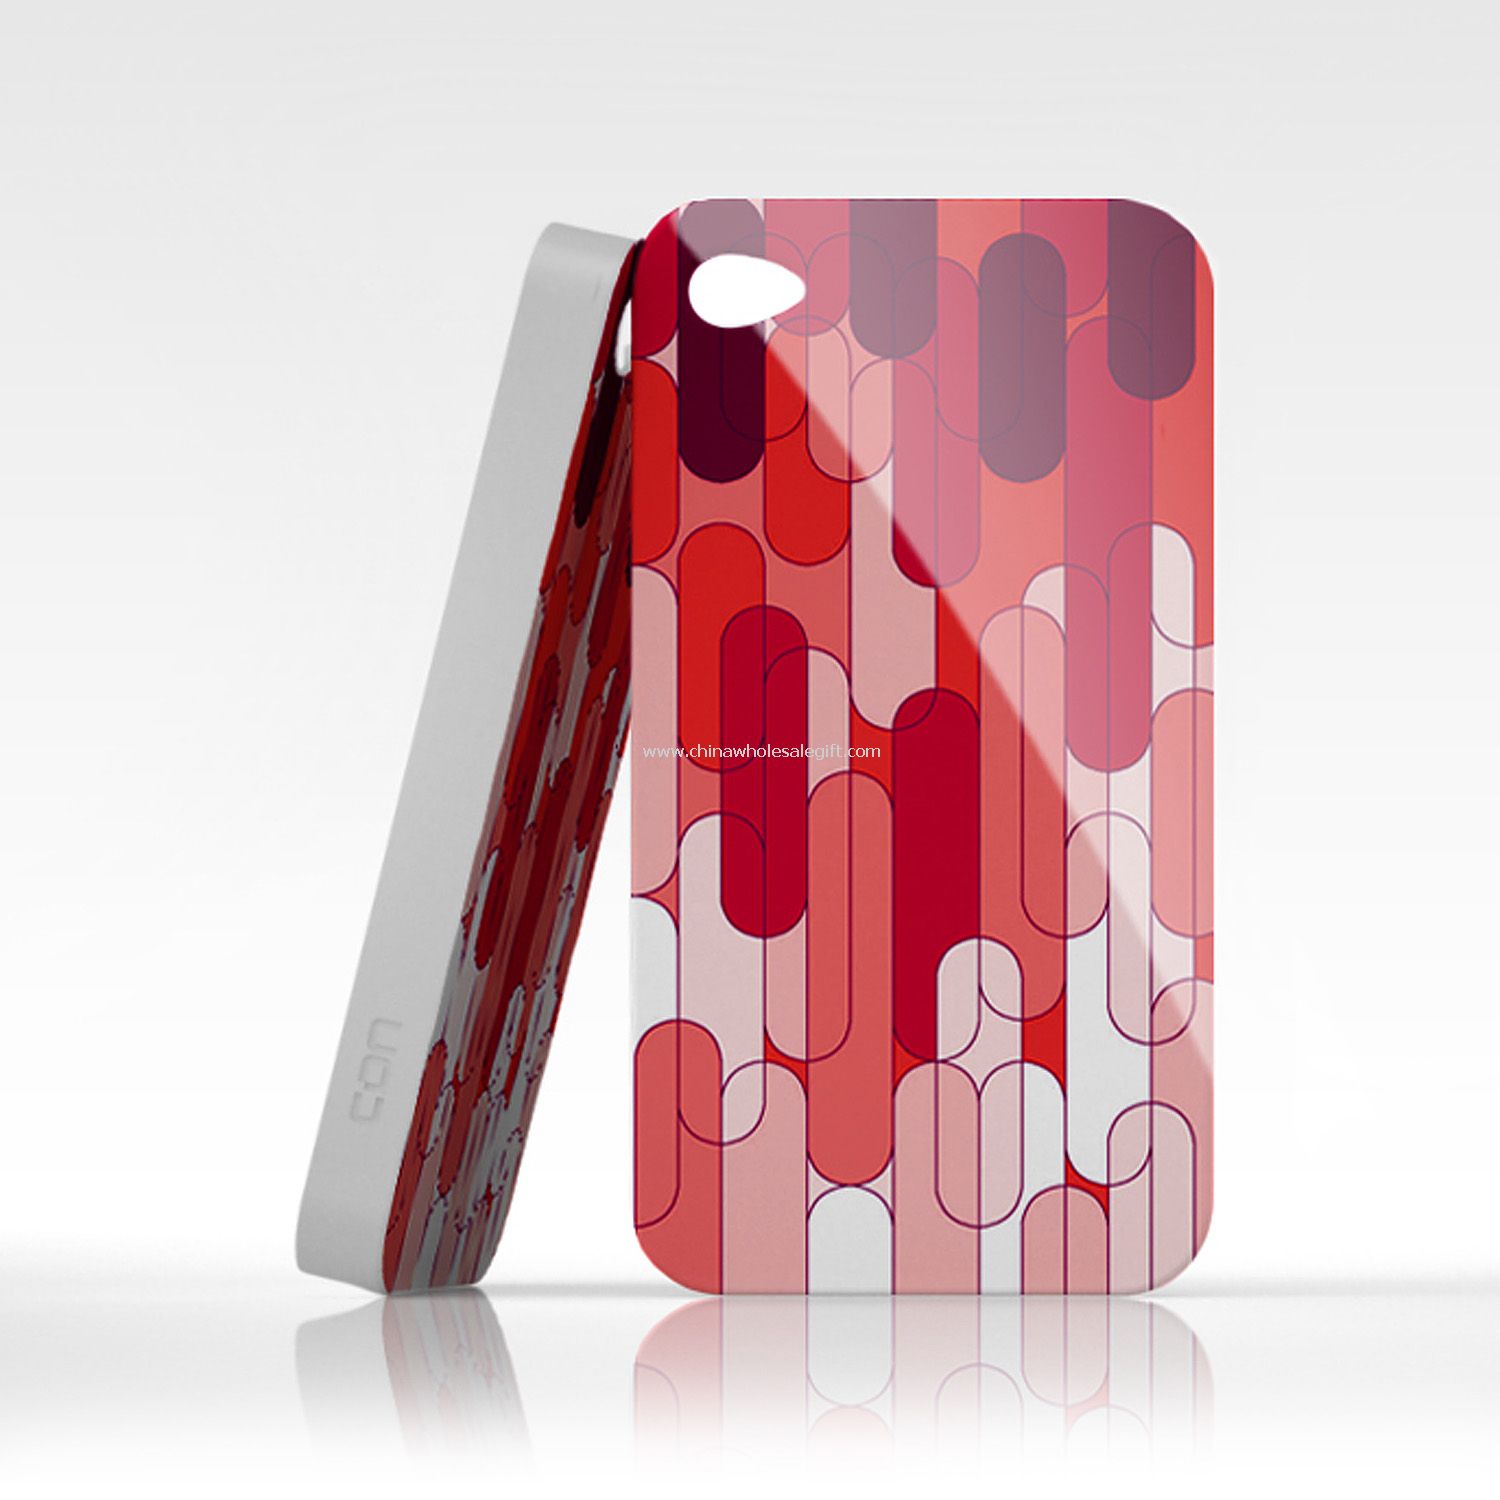 Party Scalene iphone 4 case